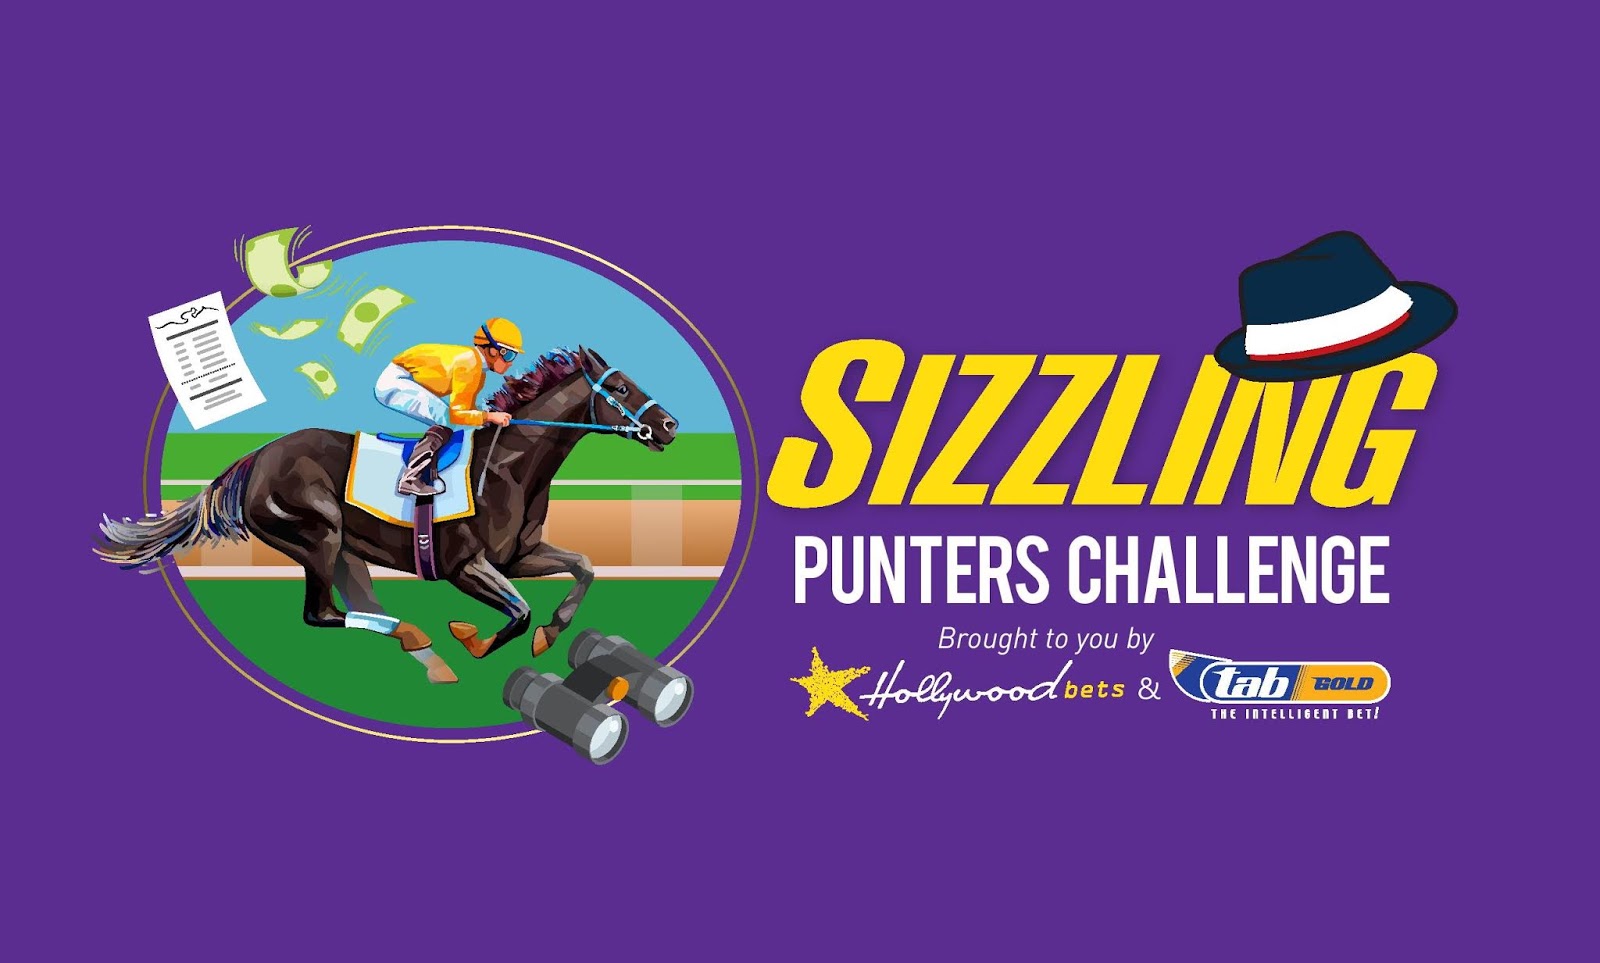 Sizzling Punters' Challenge brought to you by Hollywoodbets and tabGOLD